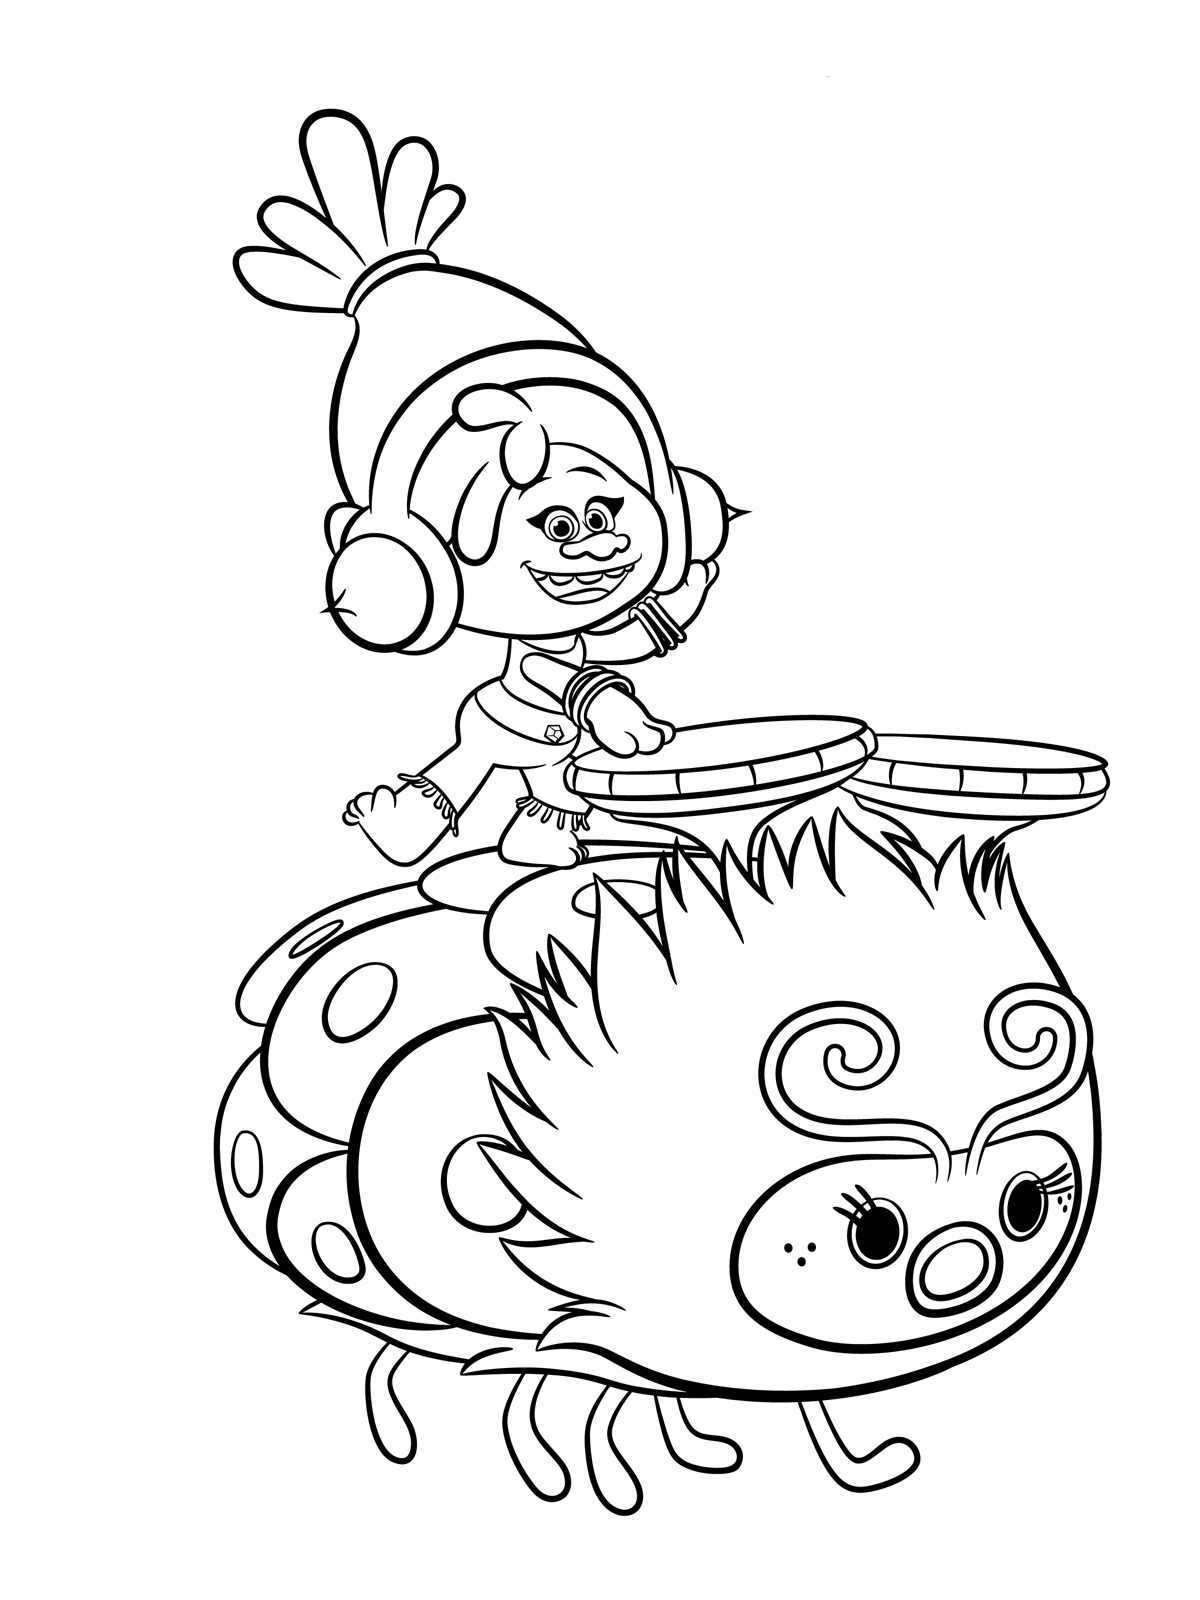 Trolls Coloring pages to download and print for free